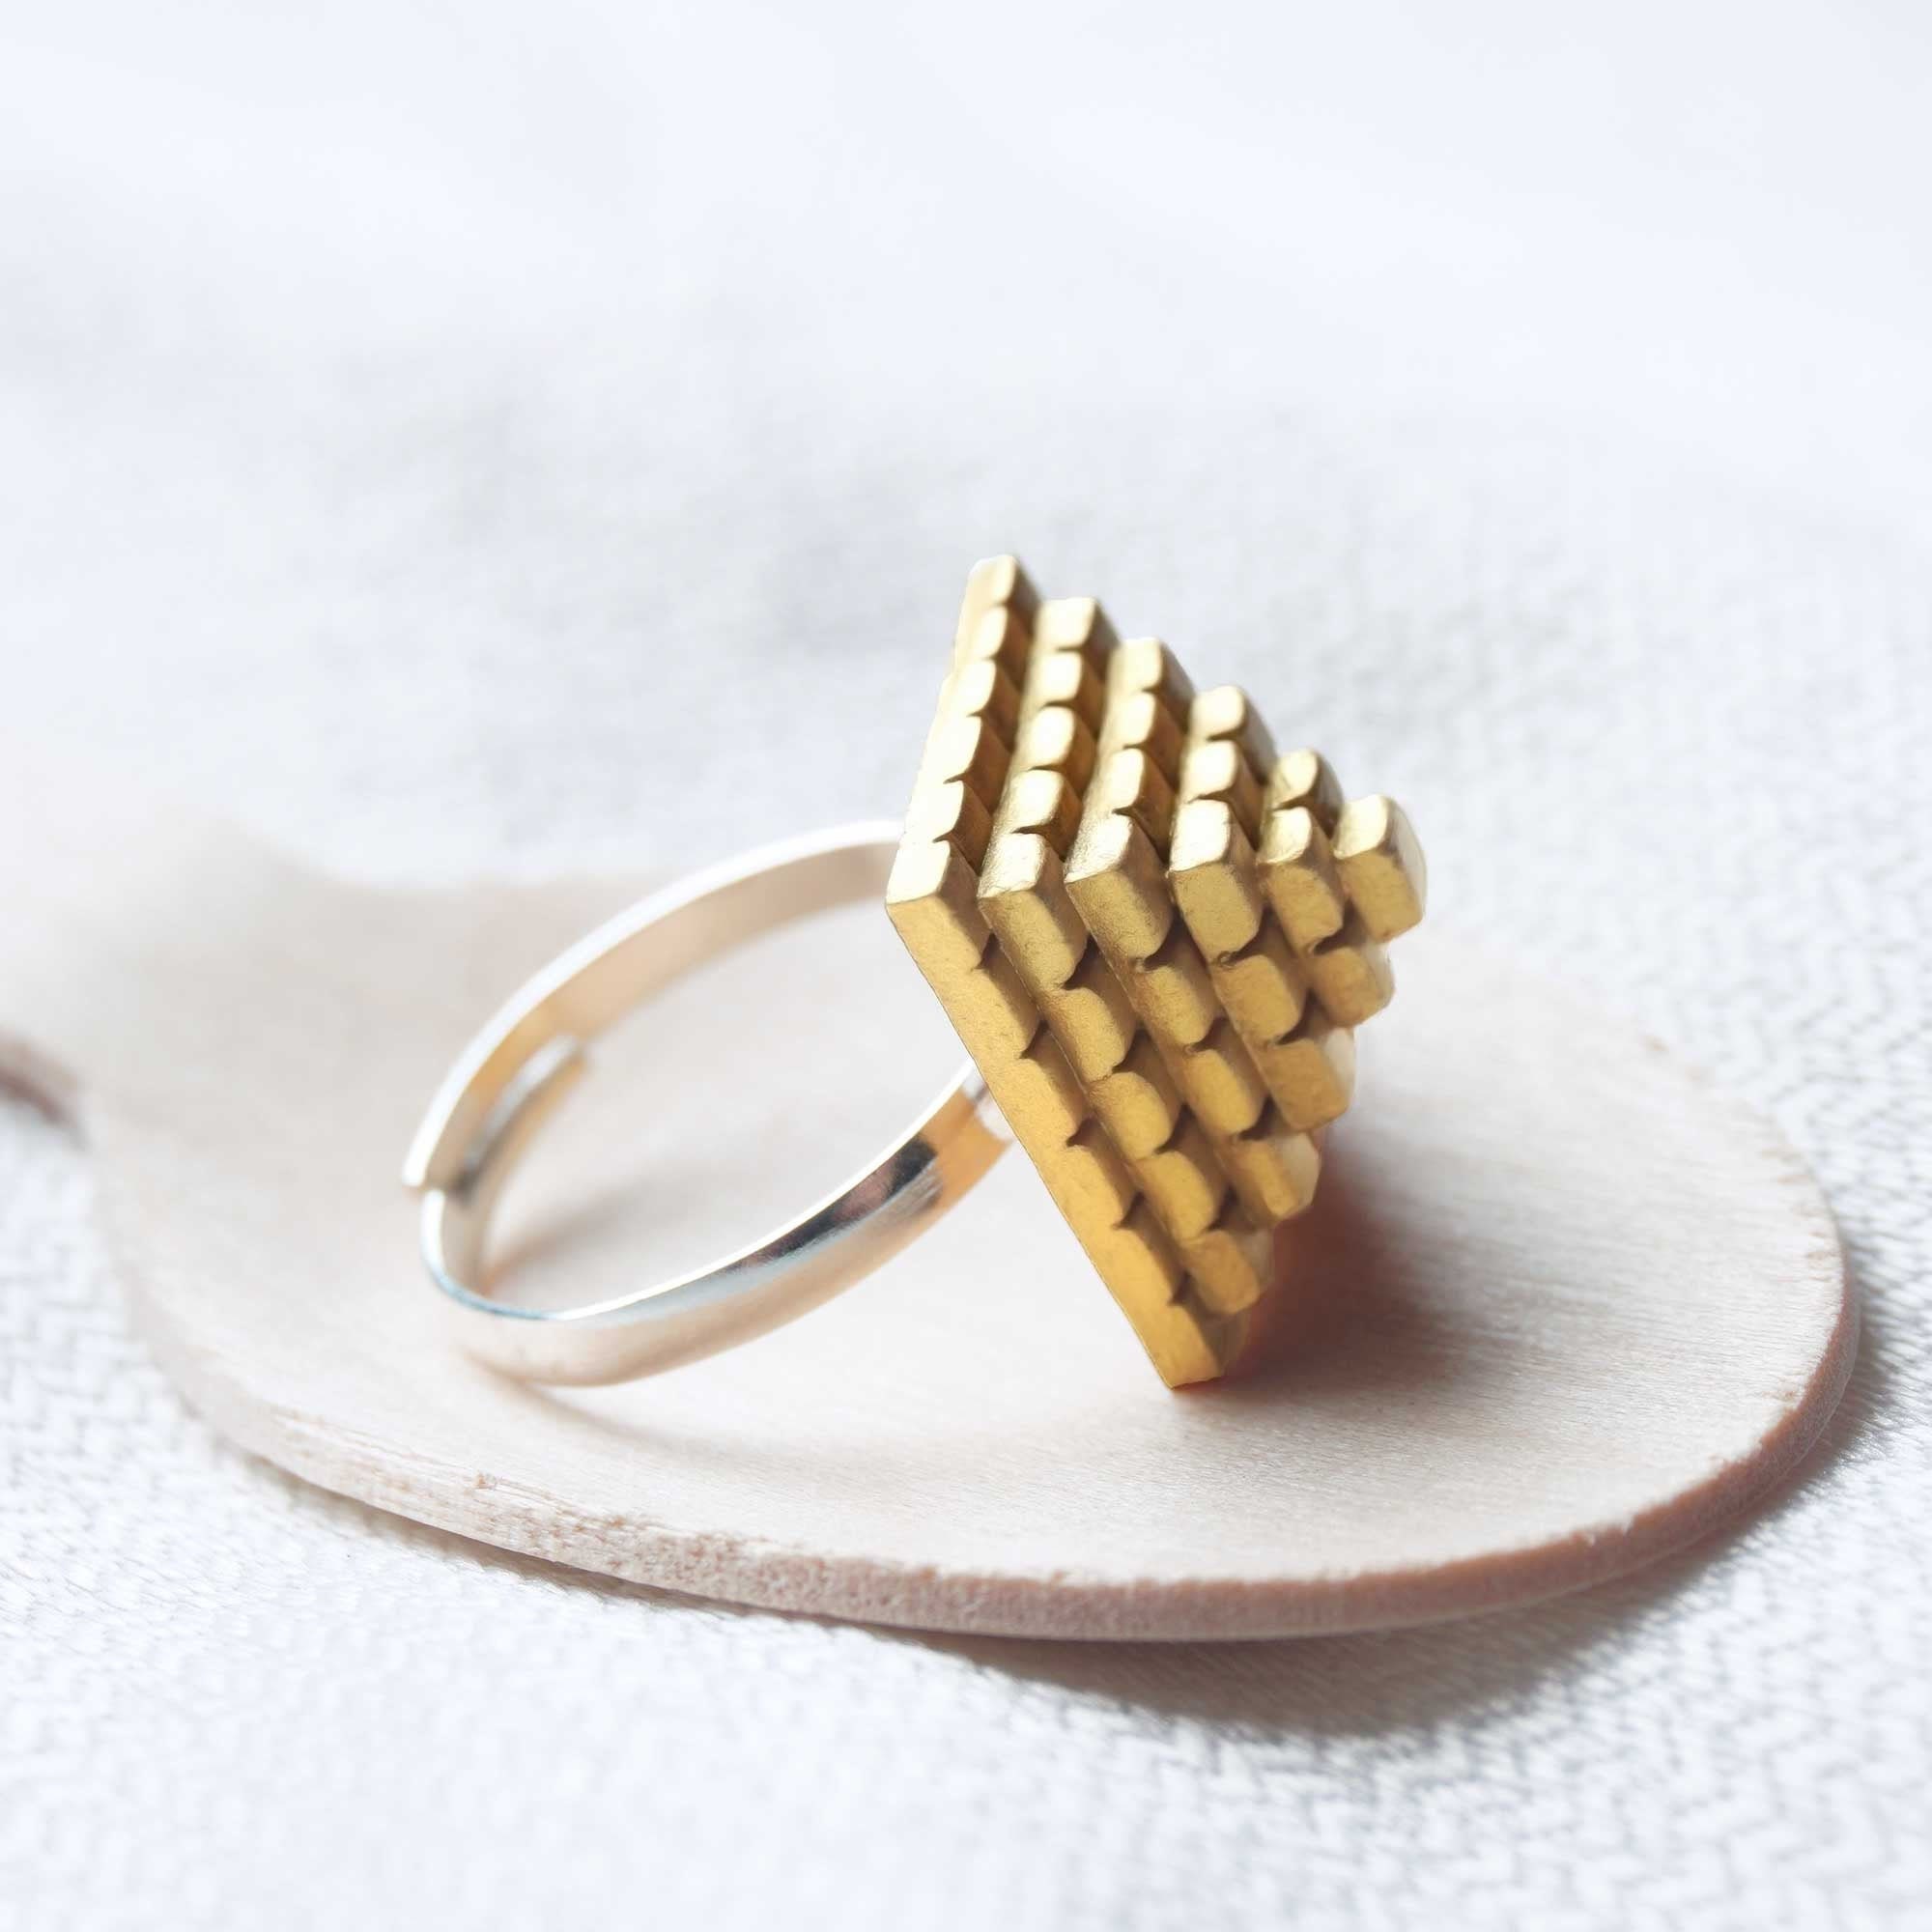 Amazon.com: 14K Solid Gold Pyramid Ring - Spike Stacking Minimalist Dainty  Ring - Real Gold Ring Jewelry (7 US): Clothing, Shoes & Jewelry